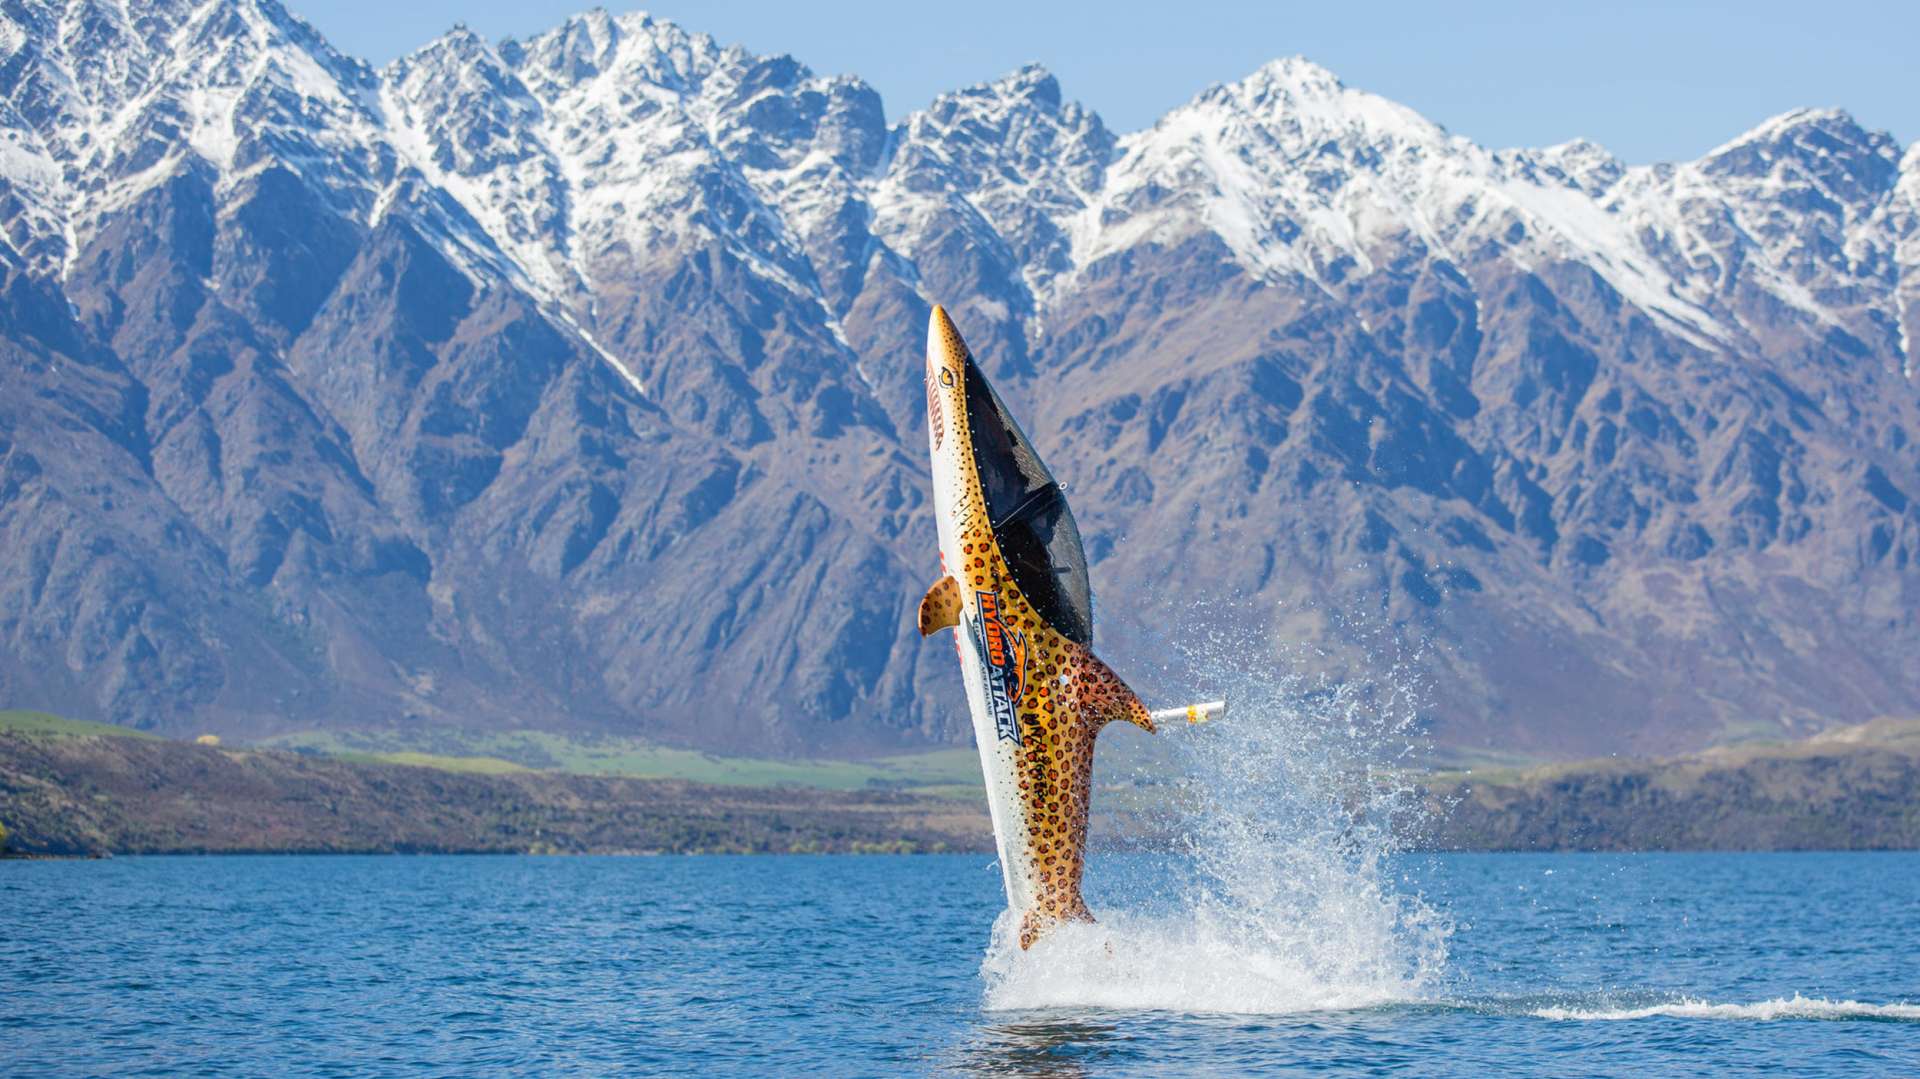 Leopard shark launching out of the water